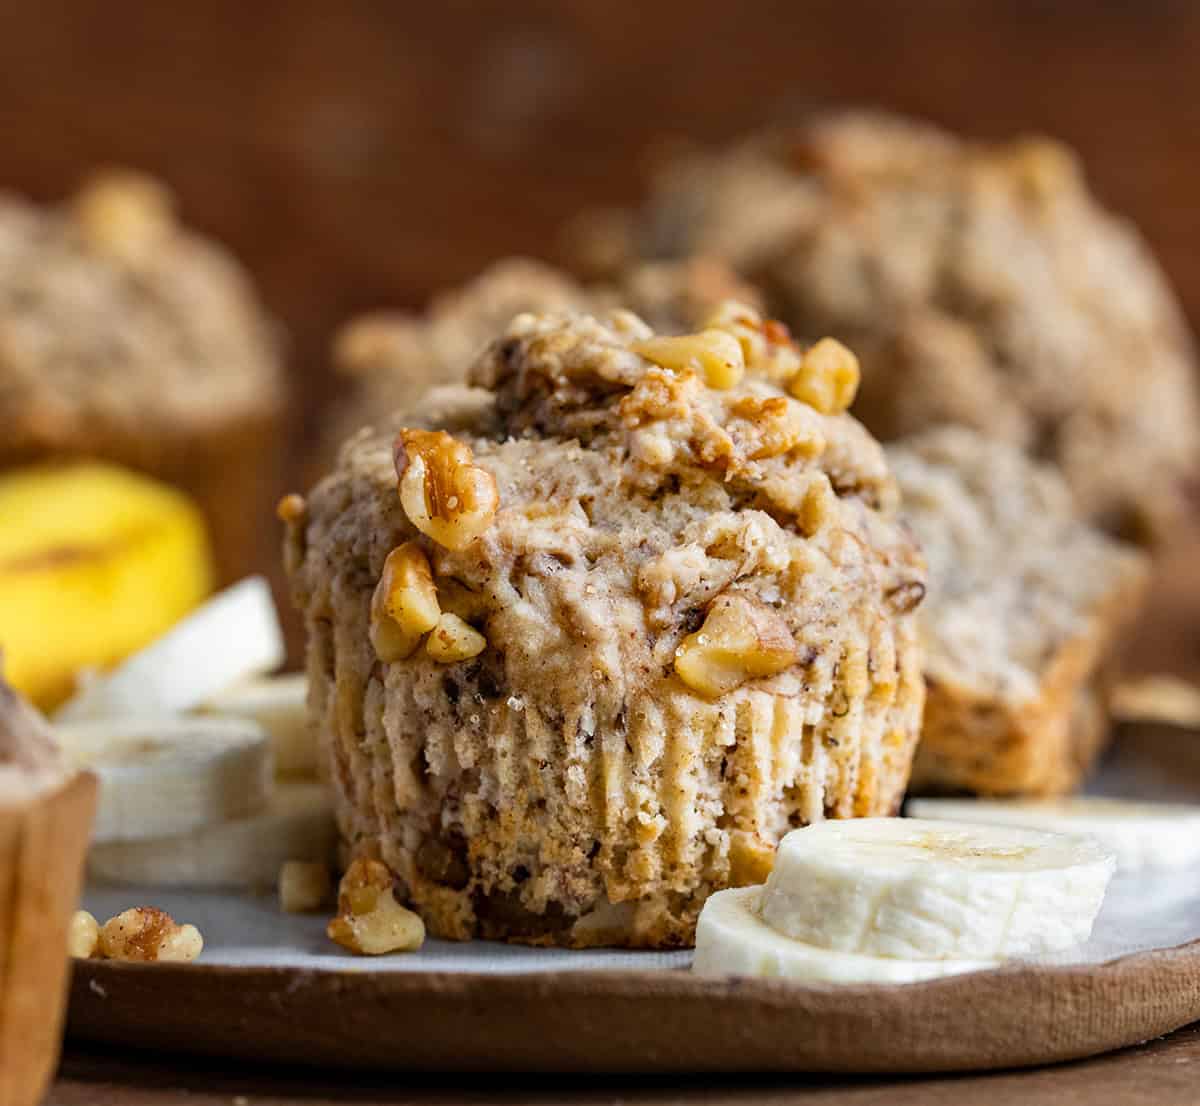 Banana Nut Muffins on a wooden table with bananas and banana slices.